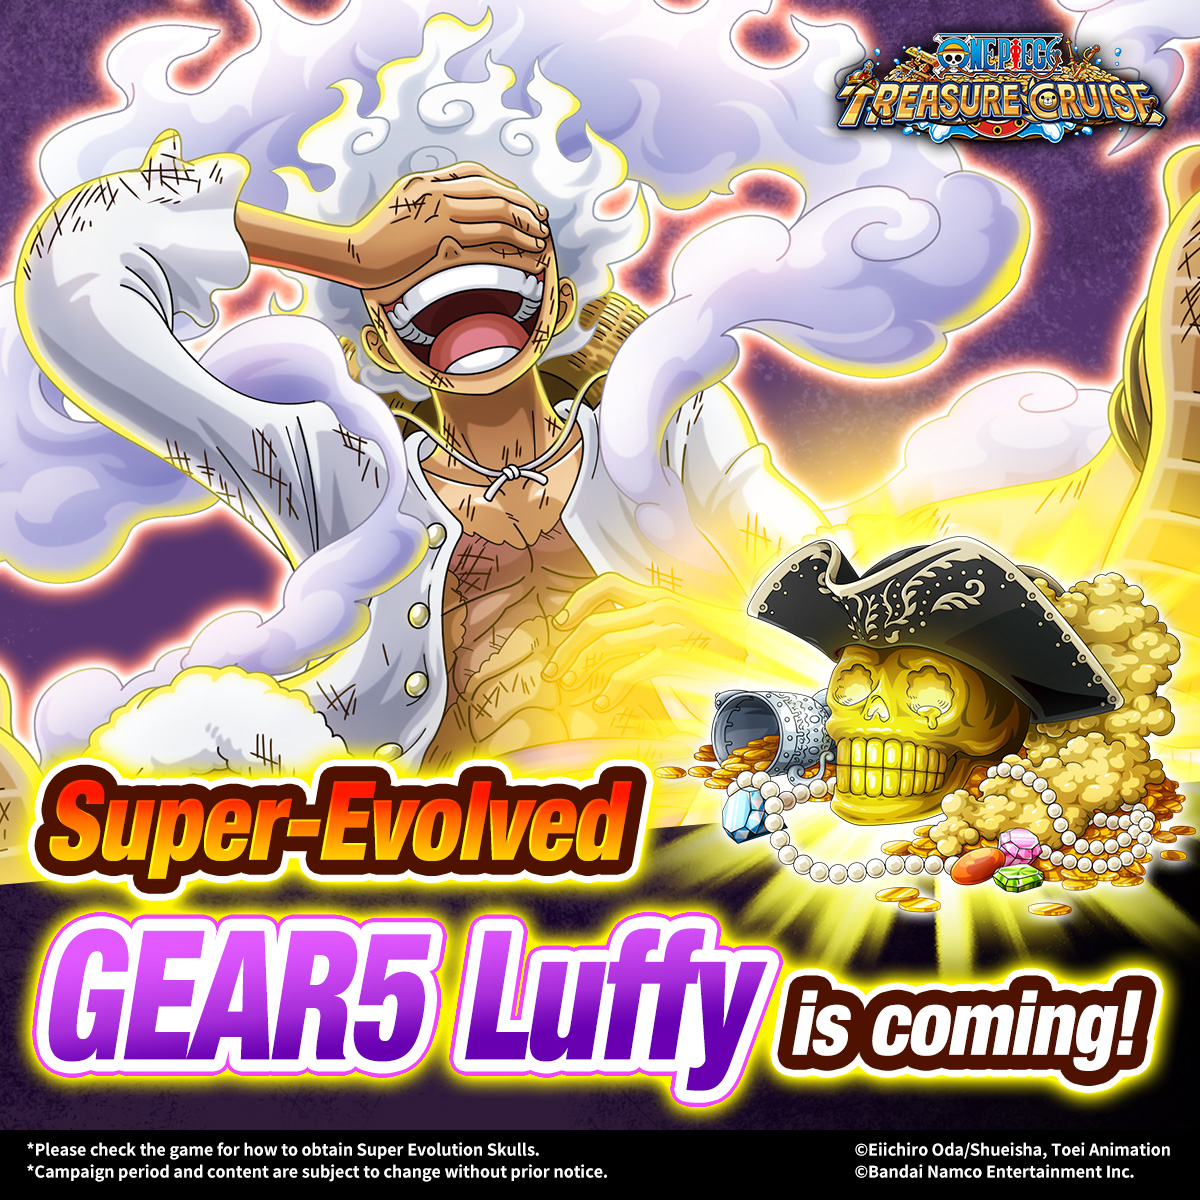 ONE PIECE Treasure Cruise on X: New Super Evolution coming soon! ✨ GEAR5  Luffy will receive a Super Evolution and his Rush Sugo Special cut-in  animation in September! Participate in the Pirate